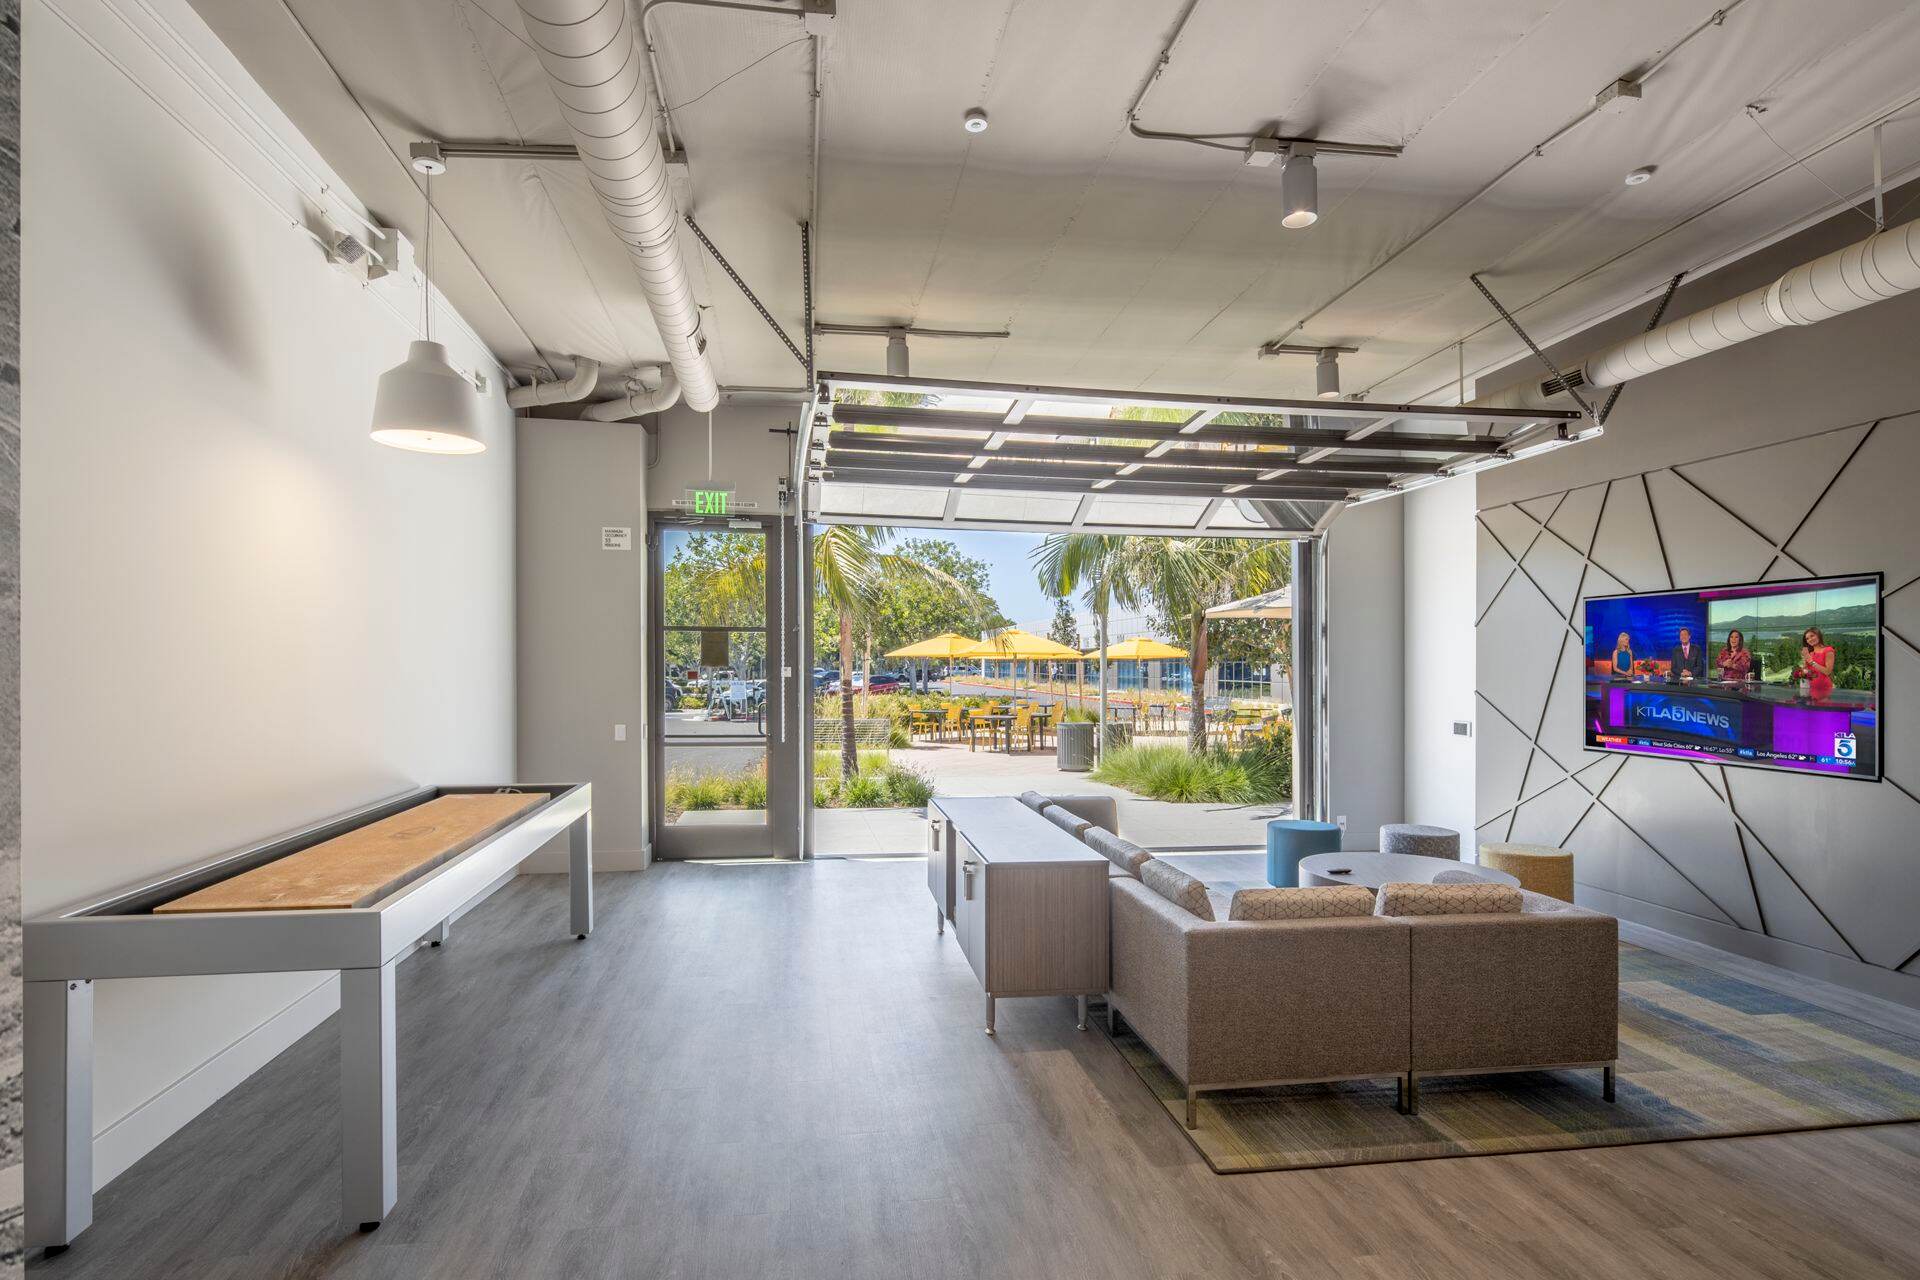 Technology Link - Office Space in Irvine, CA